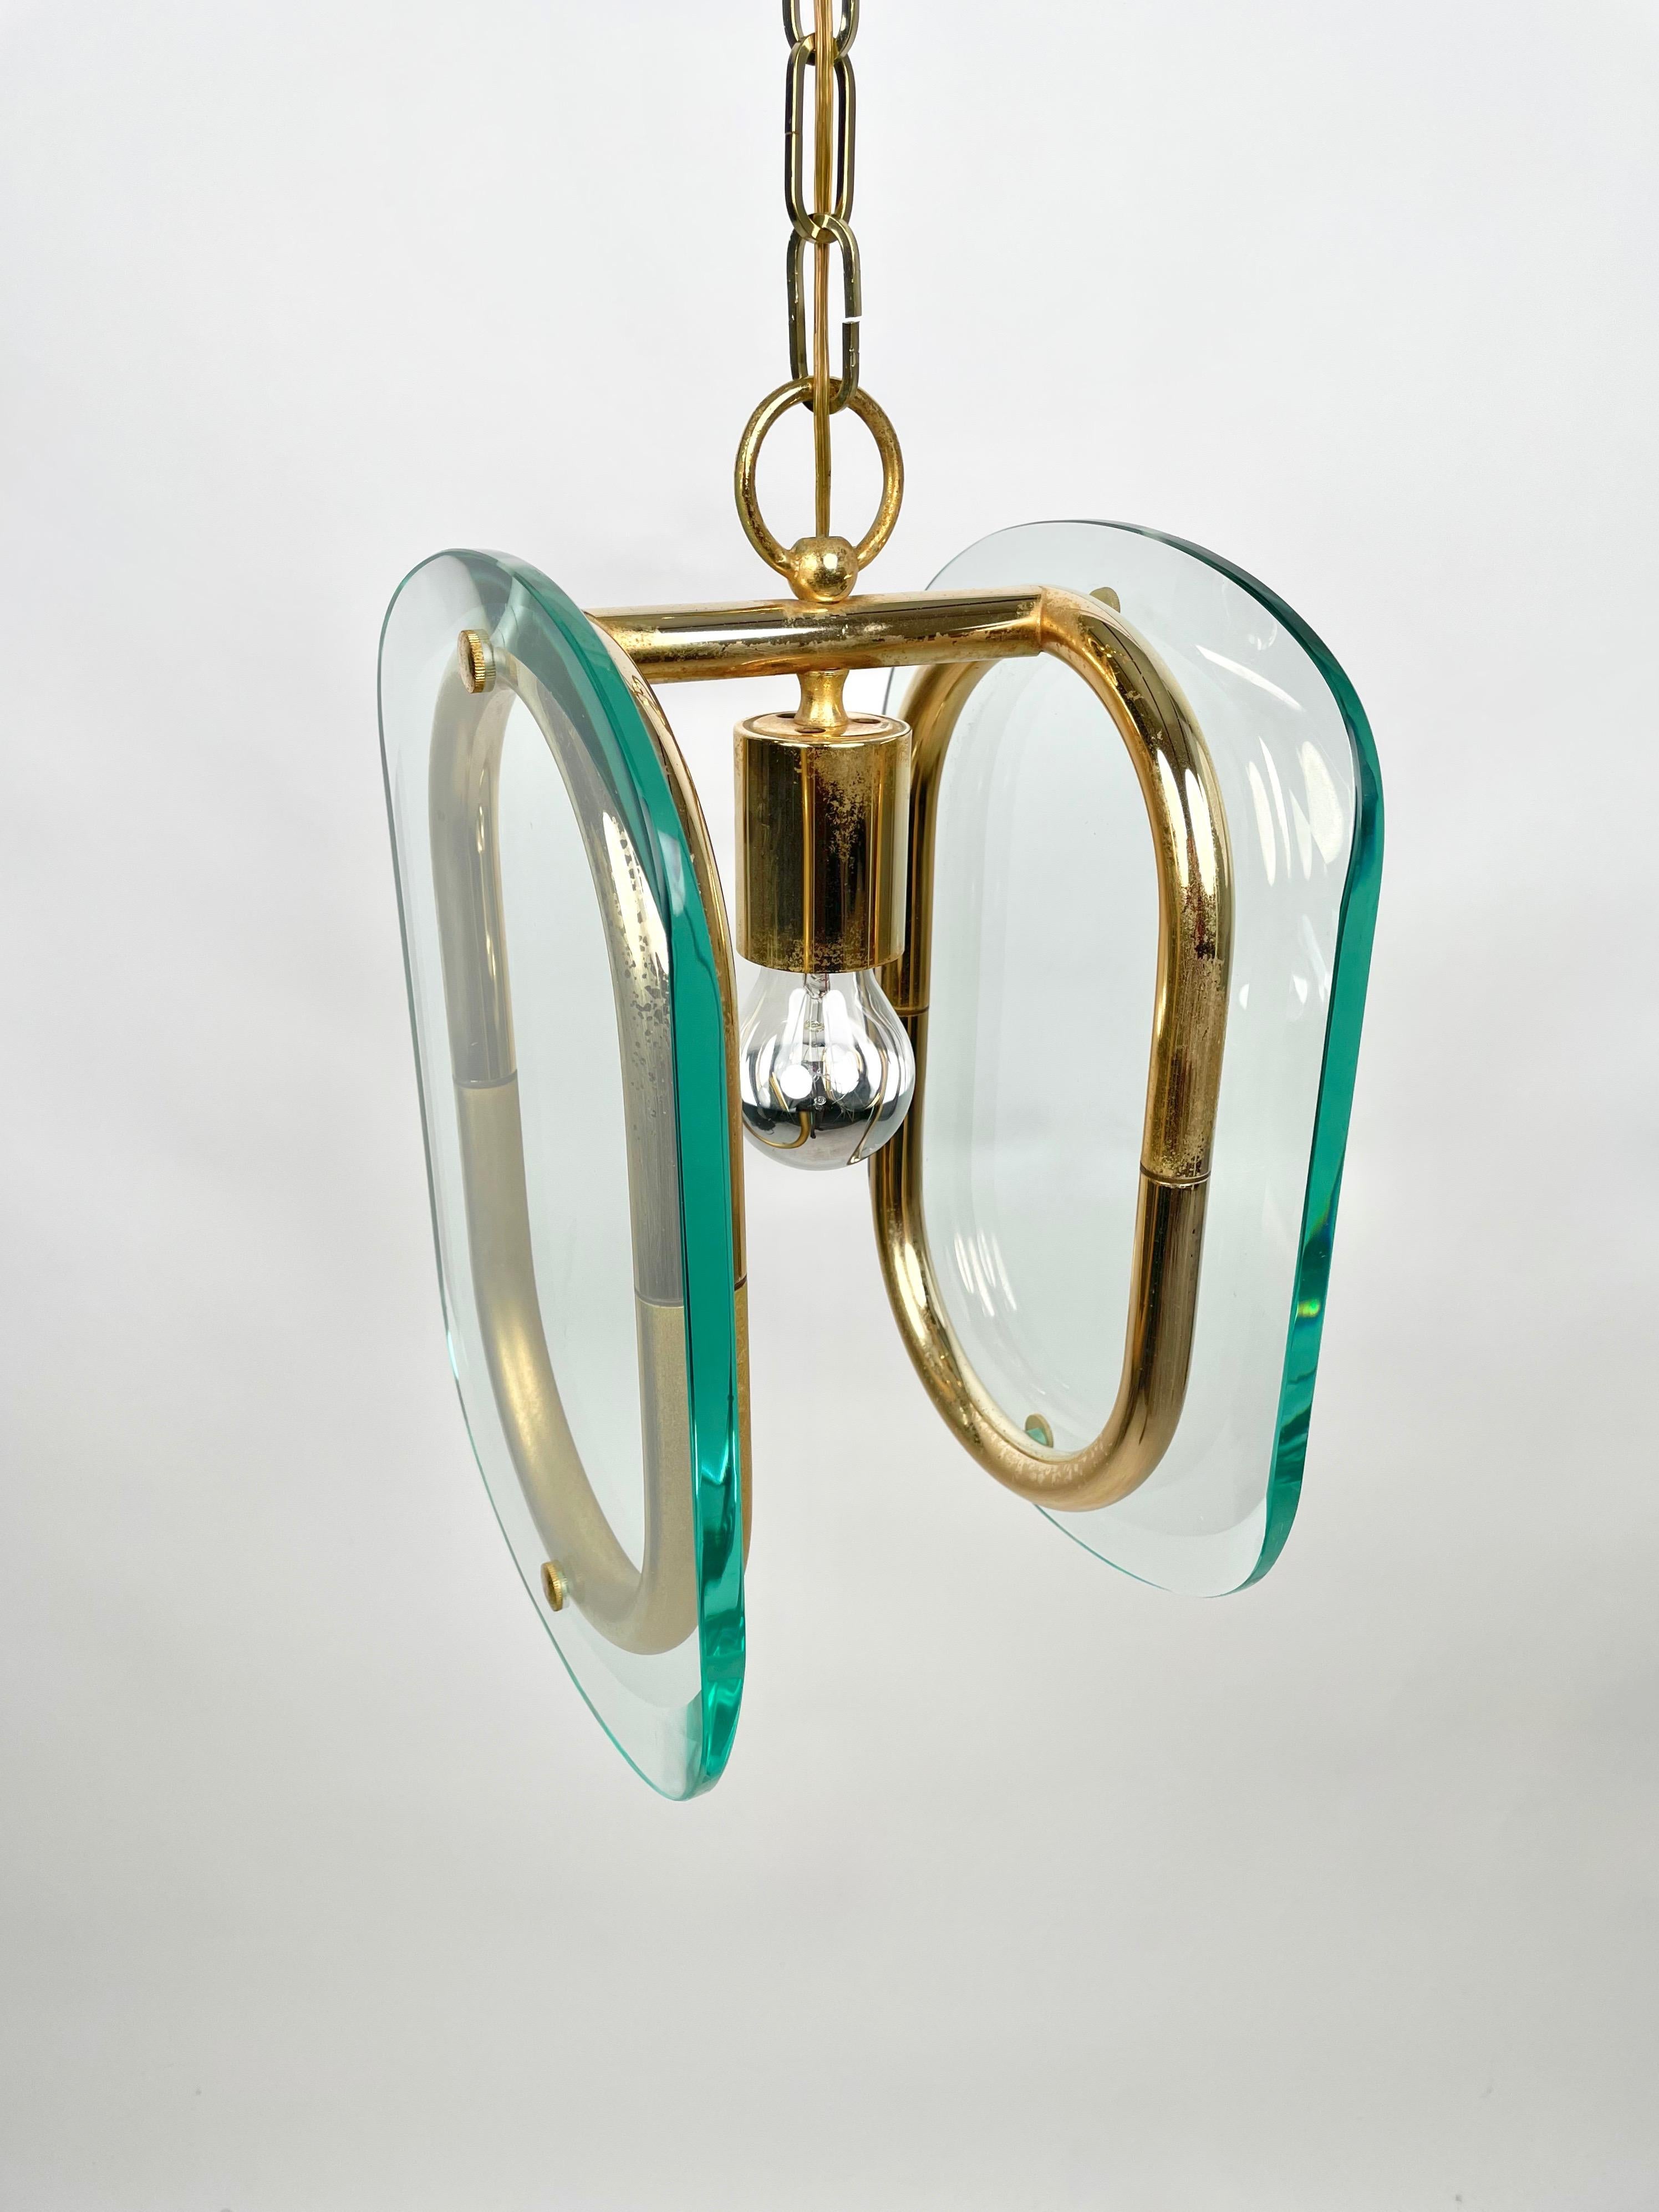 Italian Brass and Glass Chandelier Fontana Arte Style, Italy, 1970s For Sale